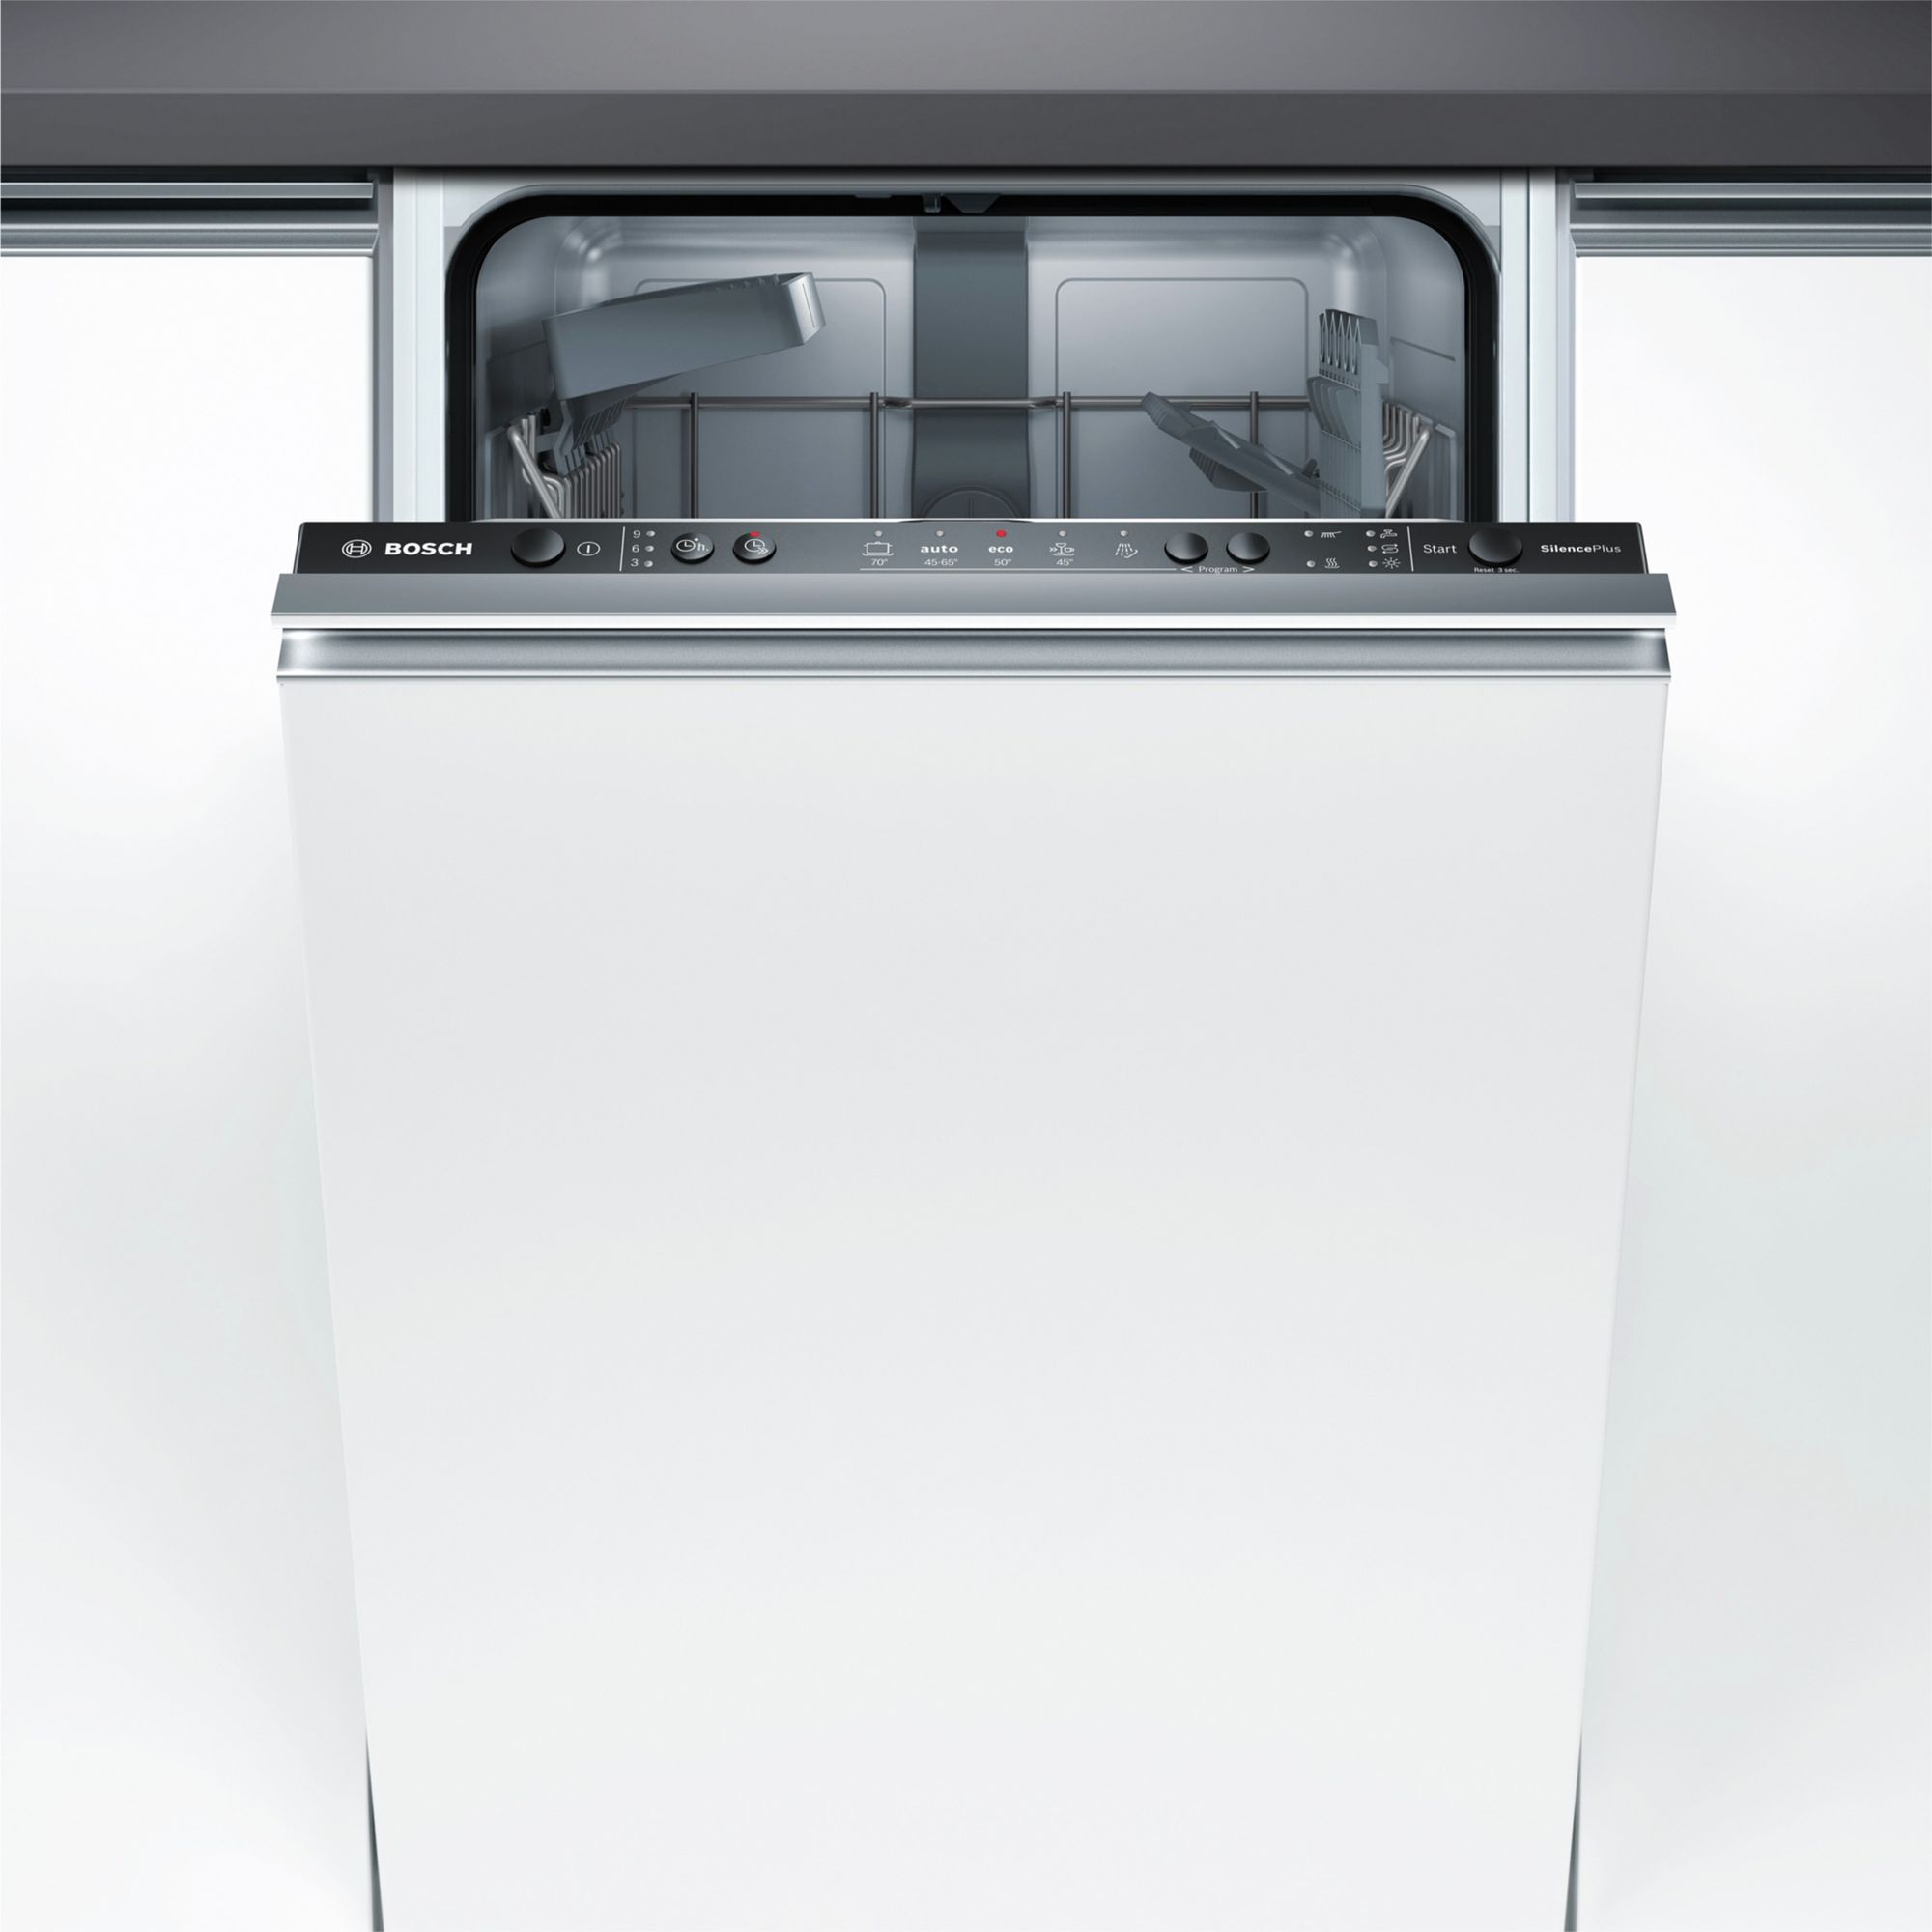 Bosch SPV25CX00G Fully Integrated Dishwasher at John Lewis & Partners